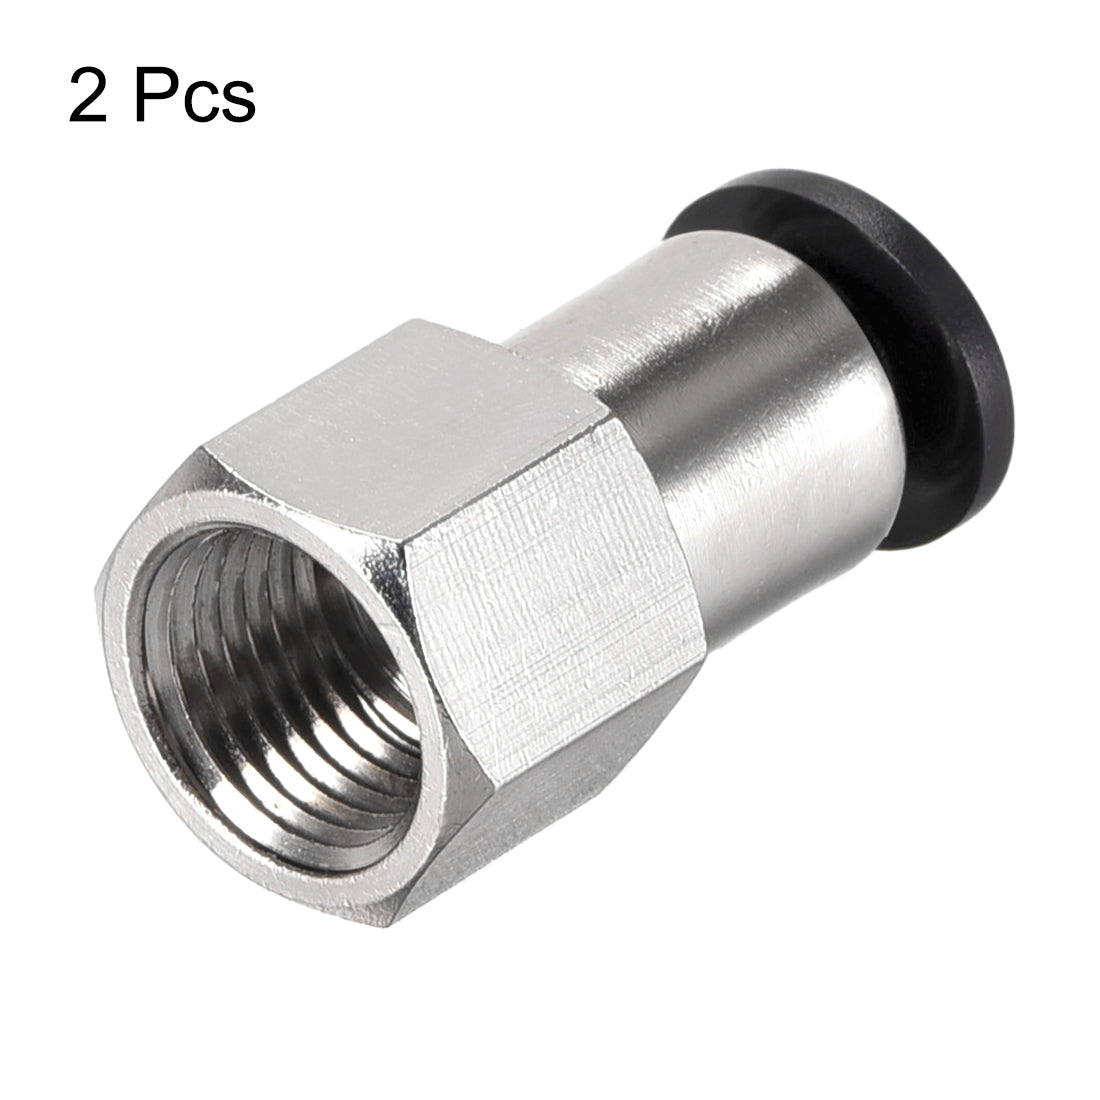 uxcell Uxcell Push to Connect Tube Fitting Adapter 4mm Tube OD x 1/8 PT Female Straight Pneumatic Connecter Connect Pipe Fitting 2pcs